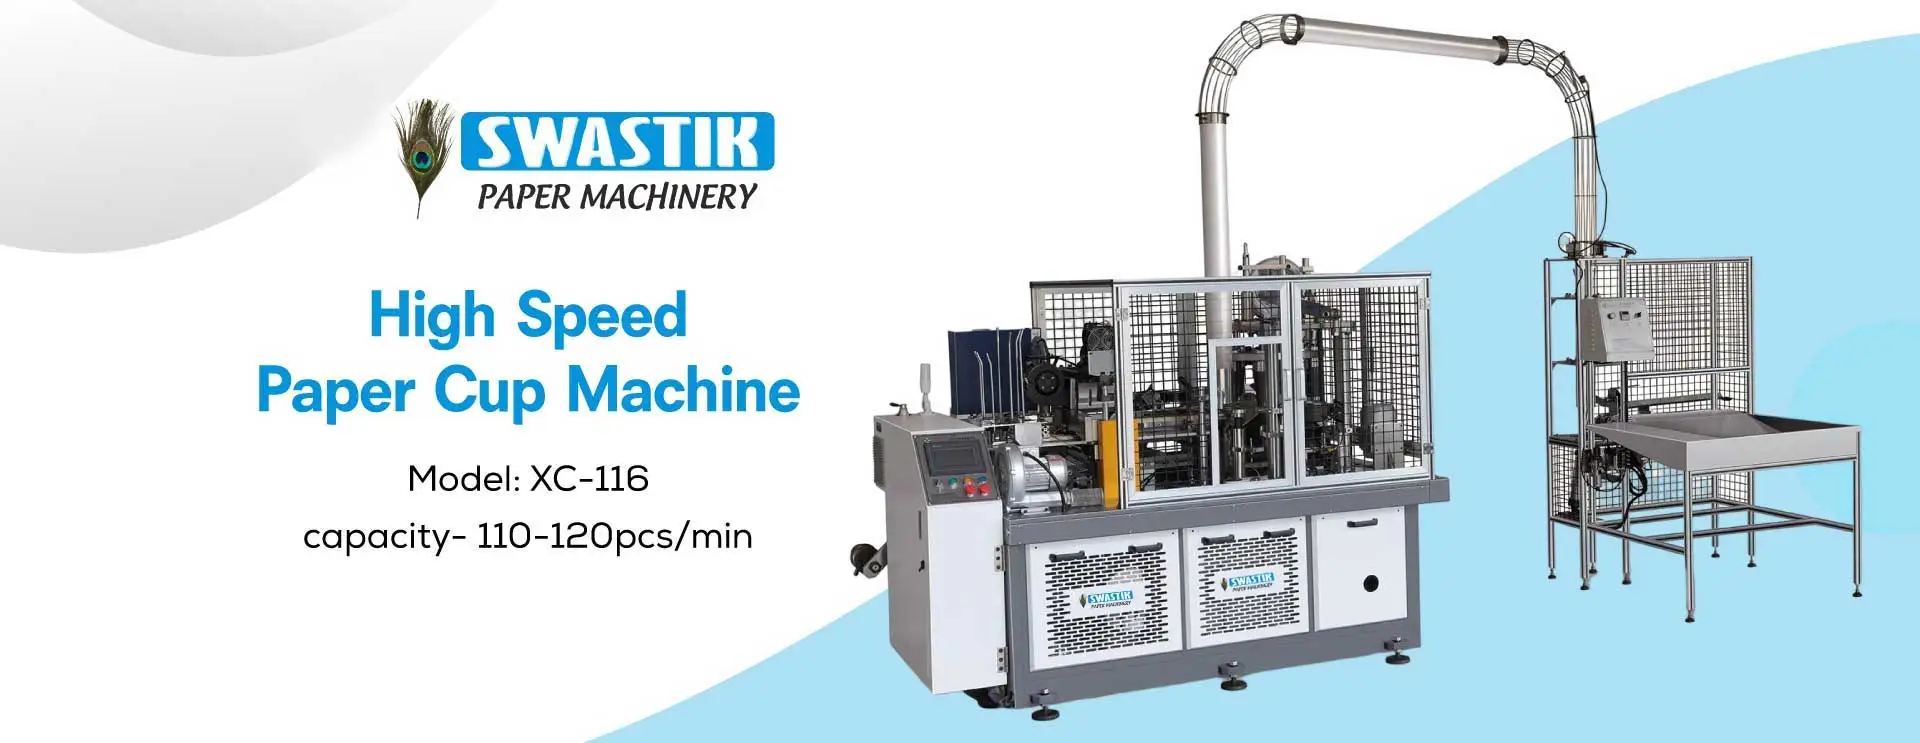 High Speed Paper Cup Machine Manufacturers in Udaipur